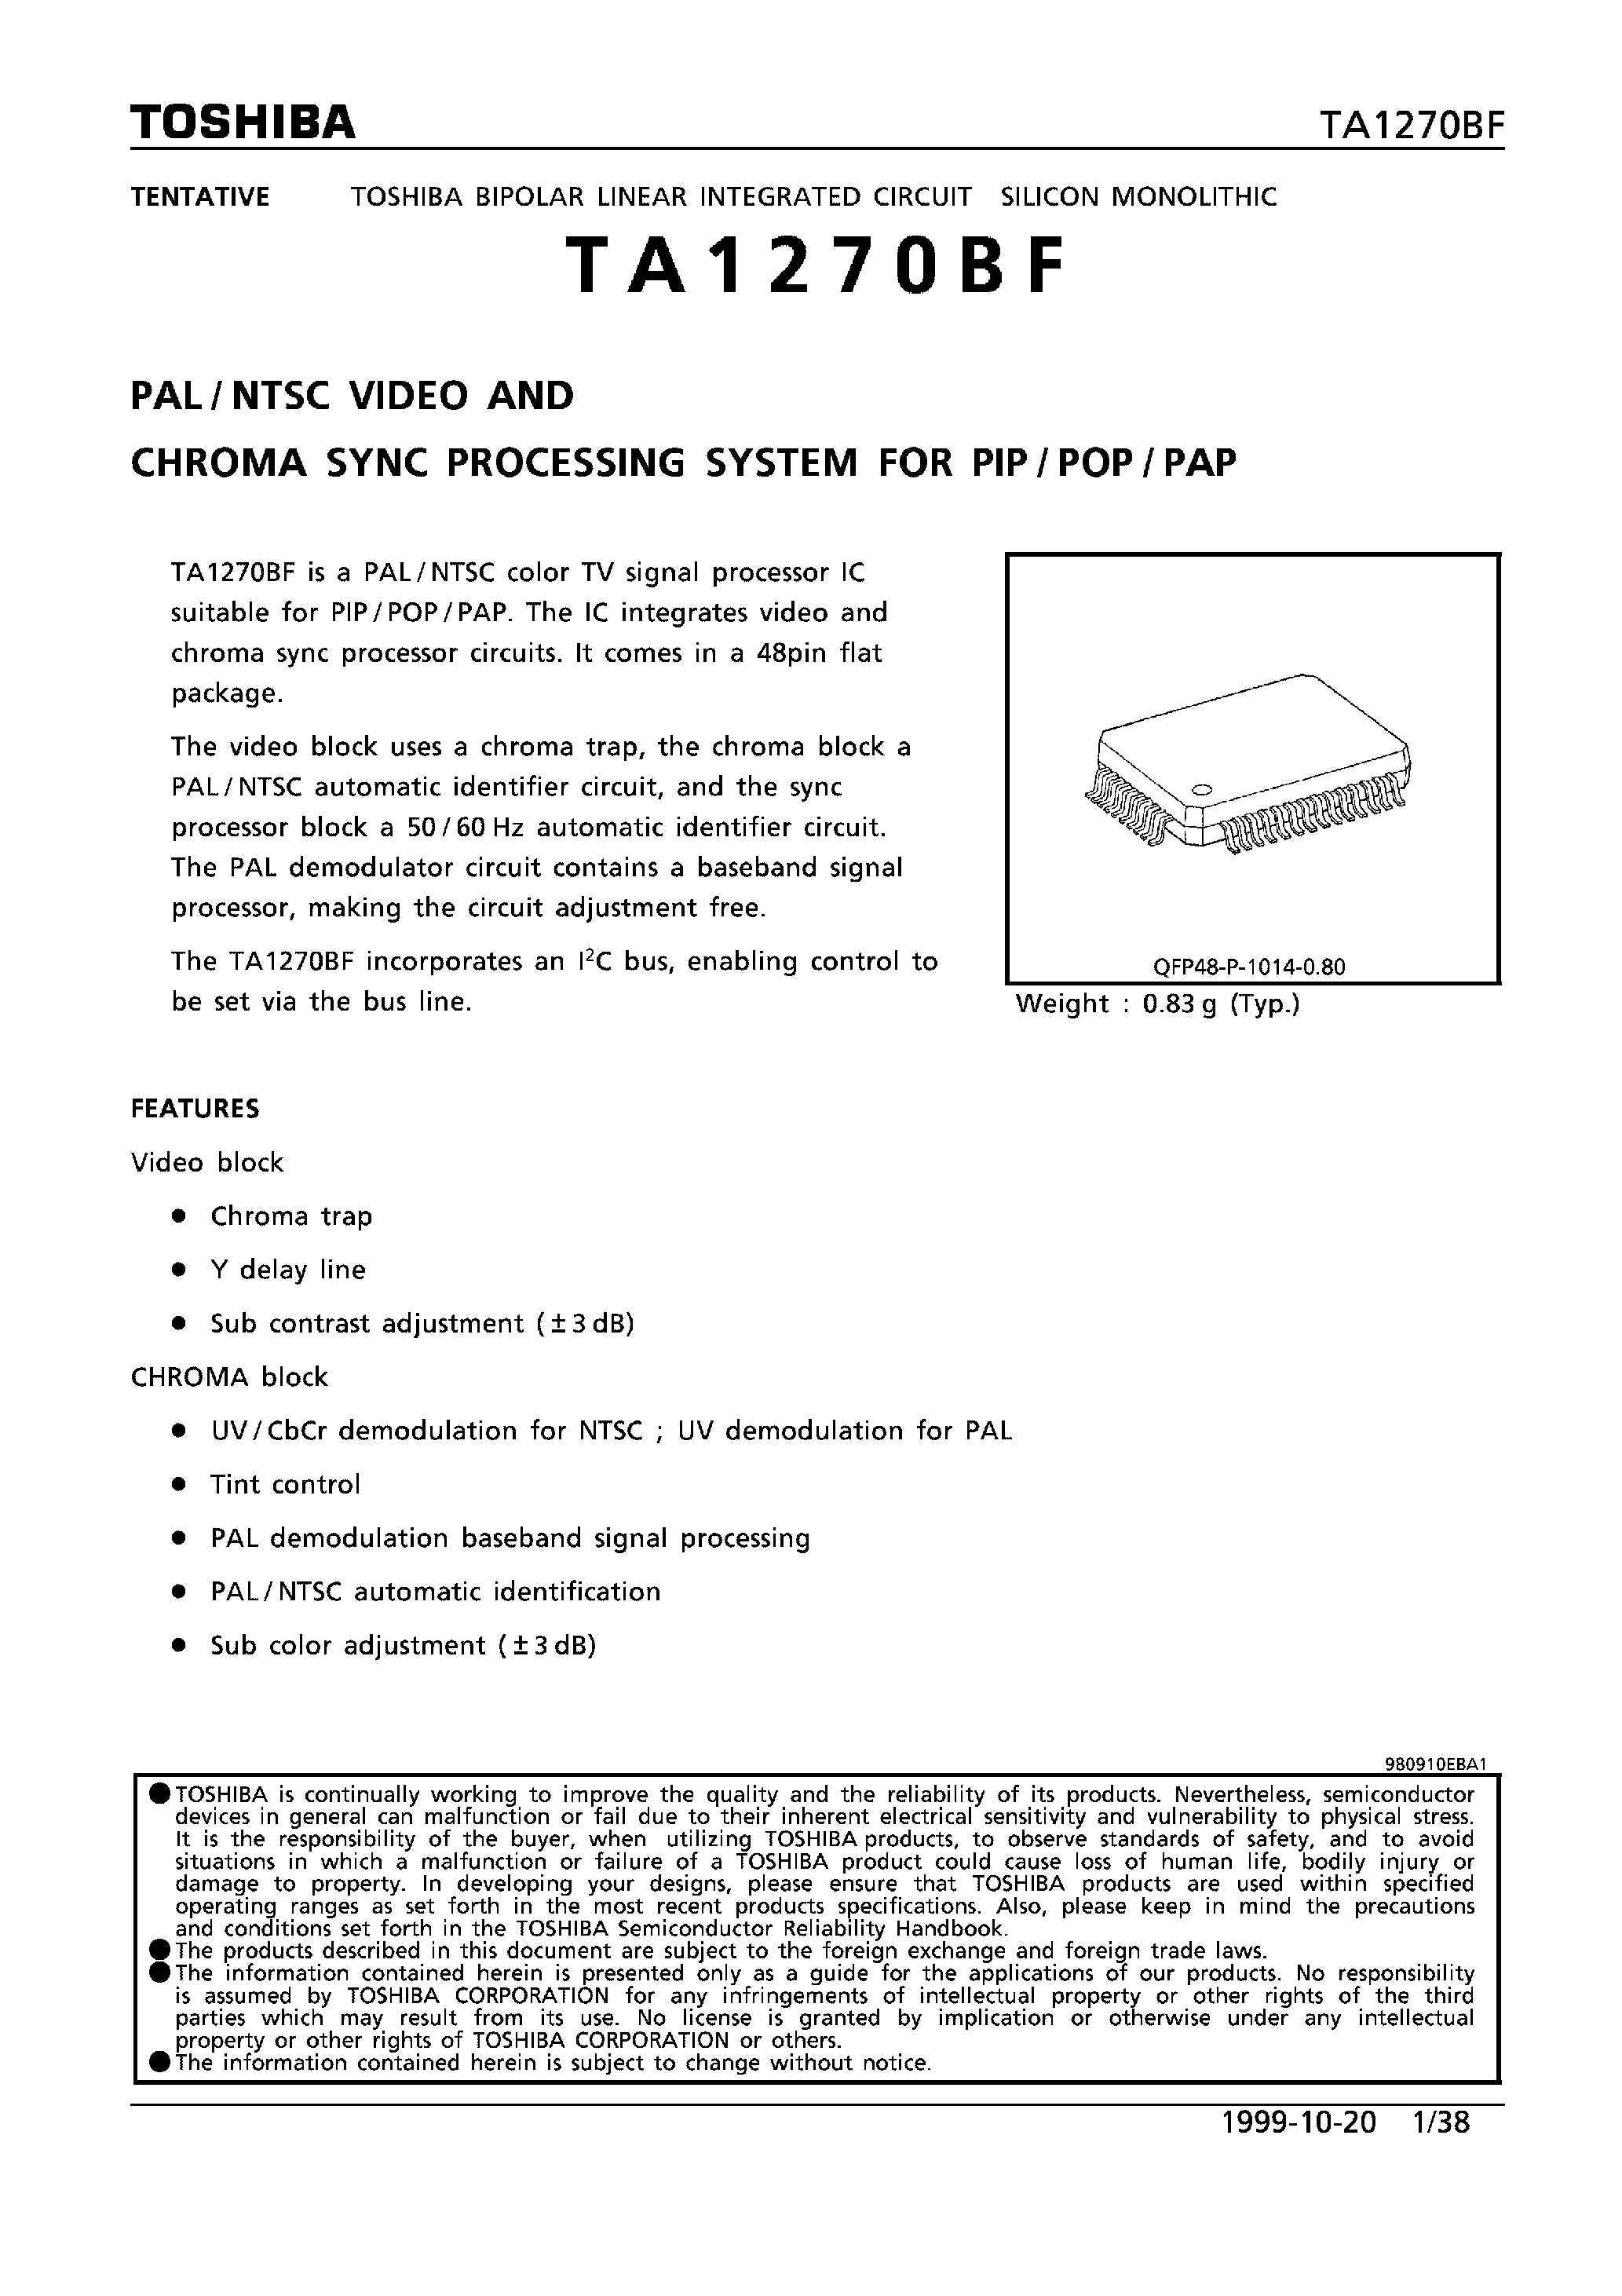 Datasheet TA1270BF - PAL/NTSC VIDEO AND CHROMA SYNC PROCESSING SYSTEM FOR PIP/POP/PAP page 1